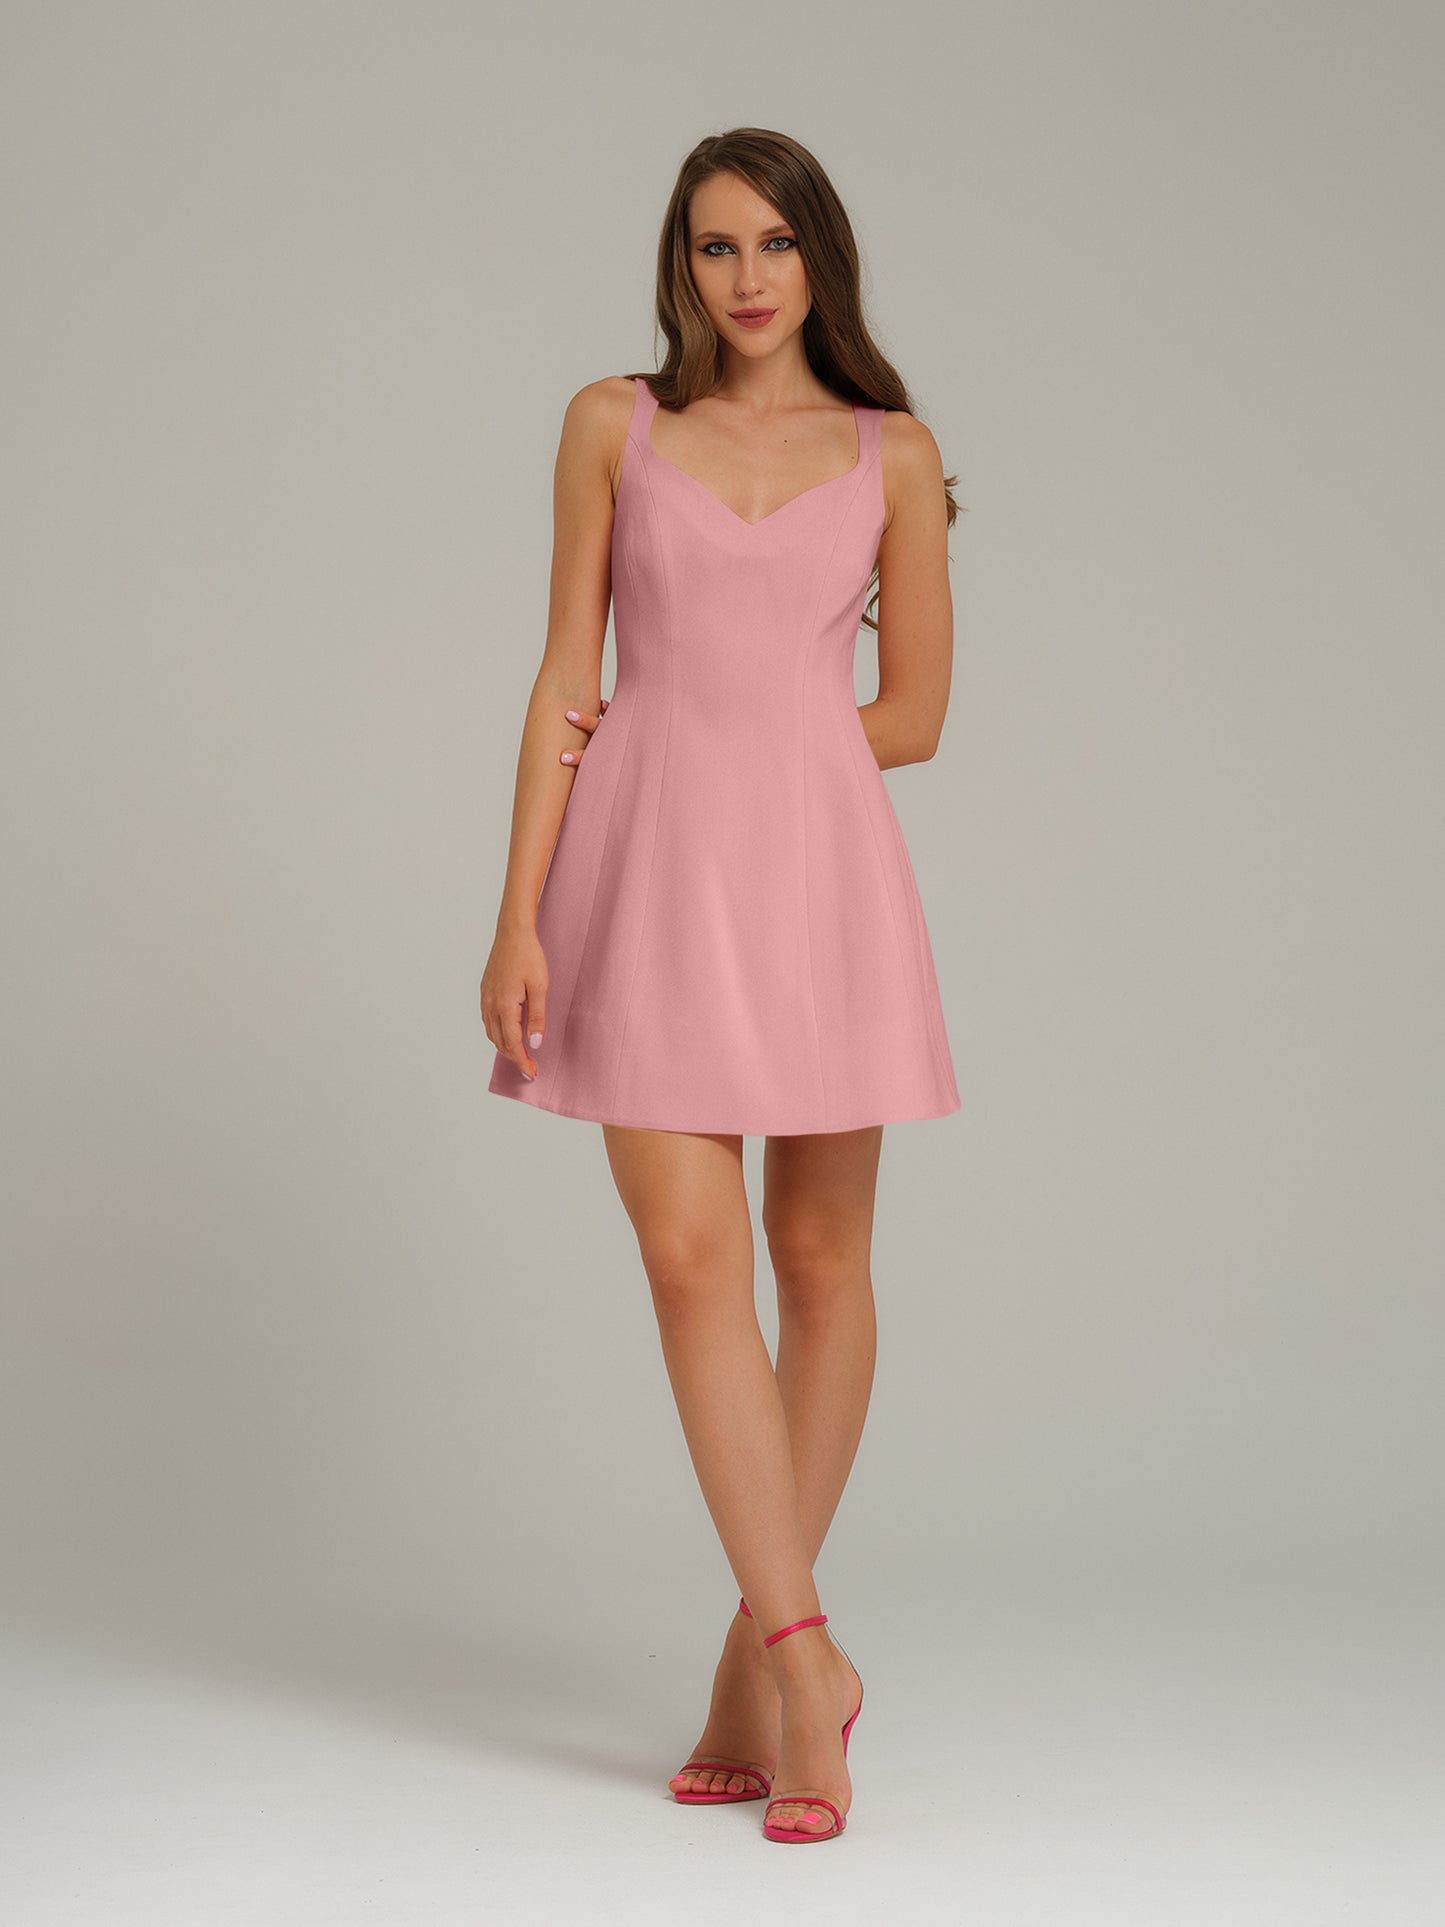 Tia DorraineLove Letter Flared Mini Dress - Cotton Candy PinkBring an air of effortless femininity to your edits with this romantic mini dress. Its sleeveless silhouette is cut from stretch crepe, detailed with a flattering sweetheart neckline, and a flar